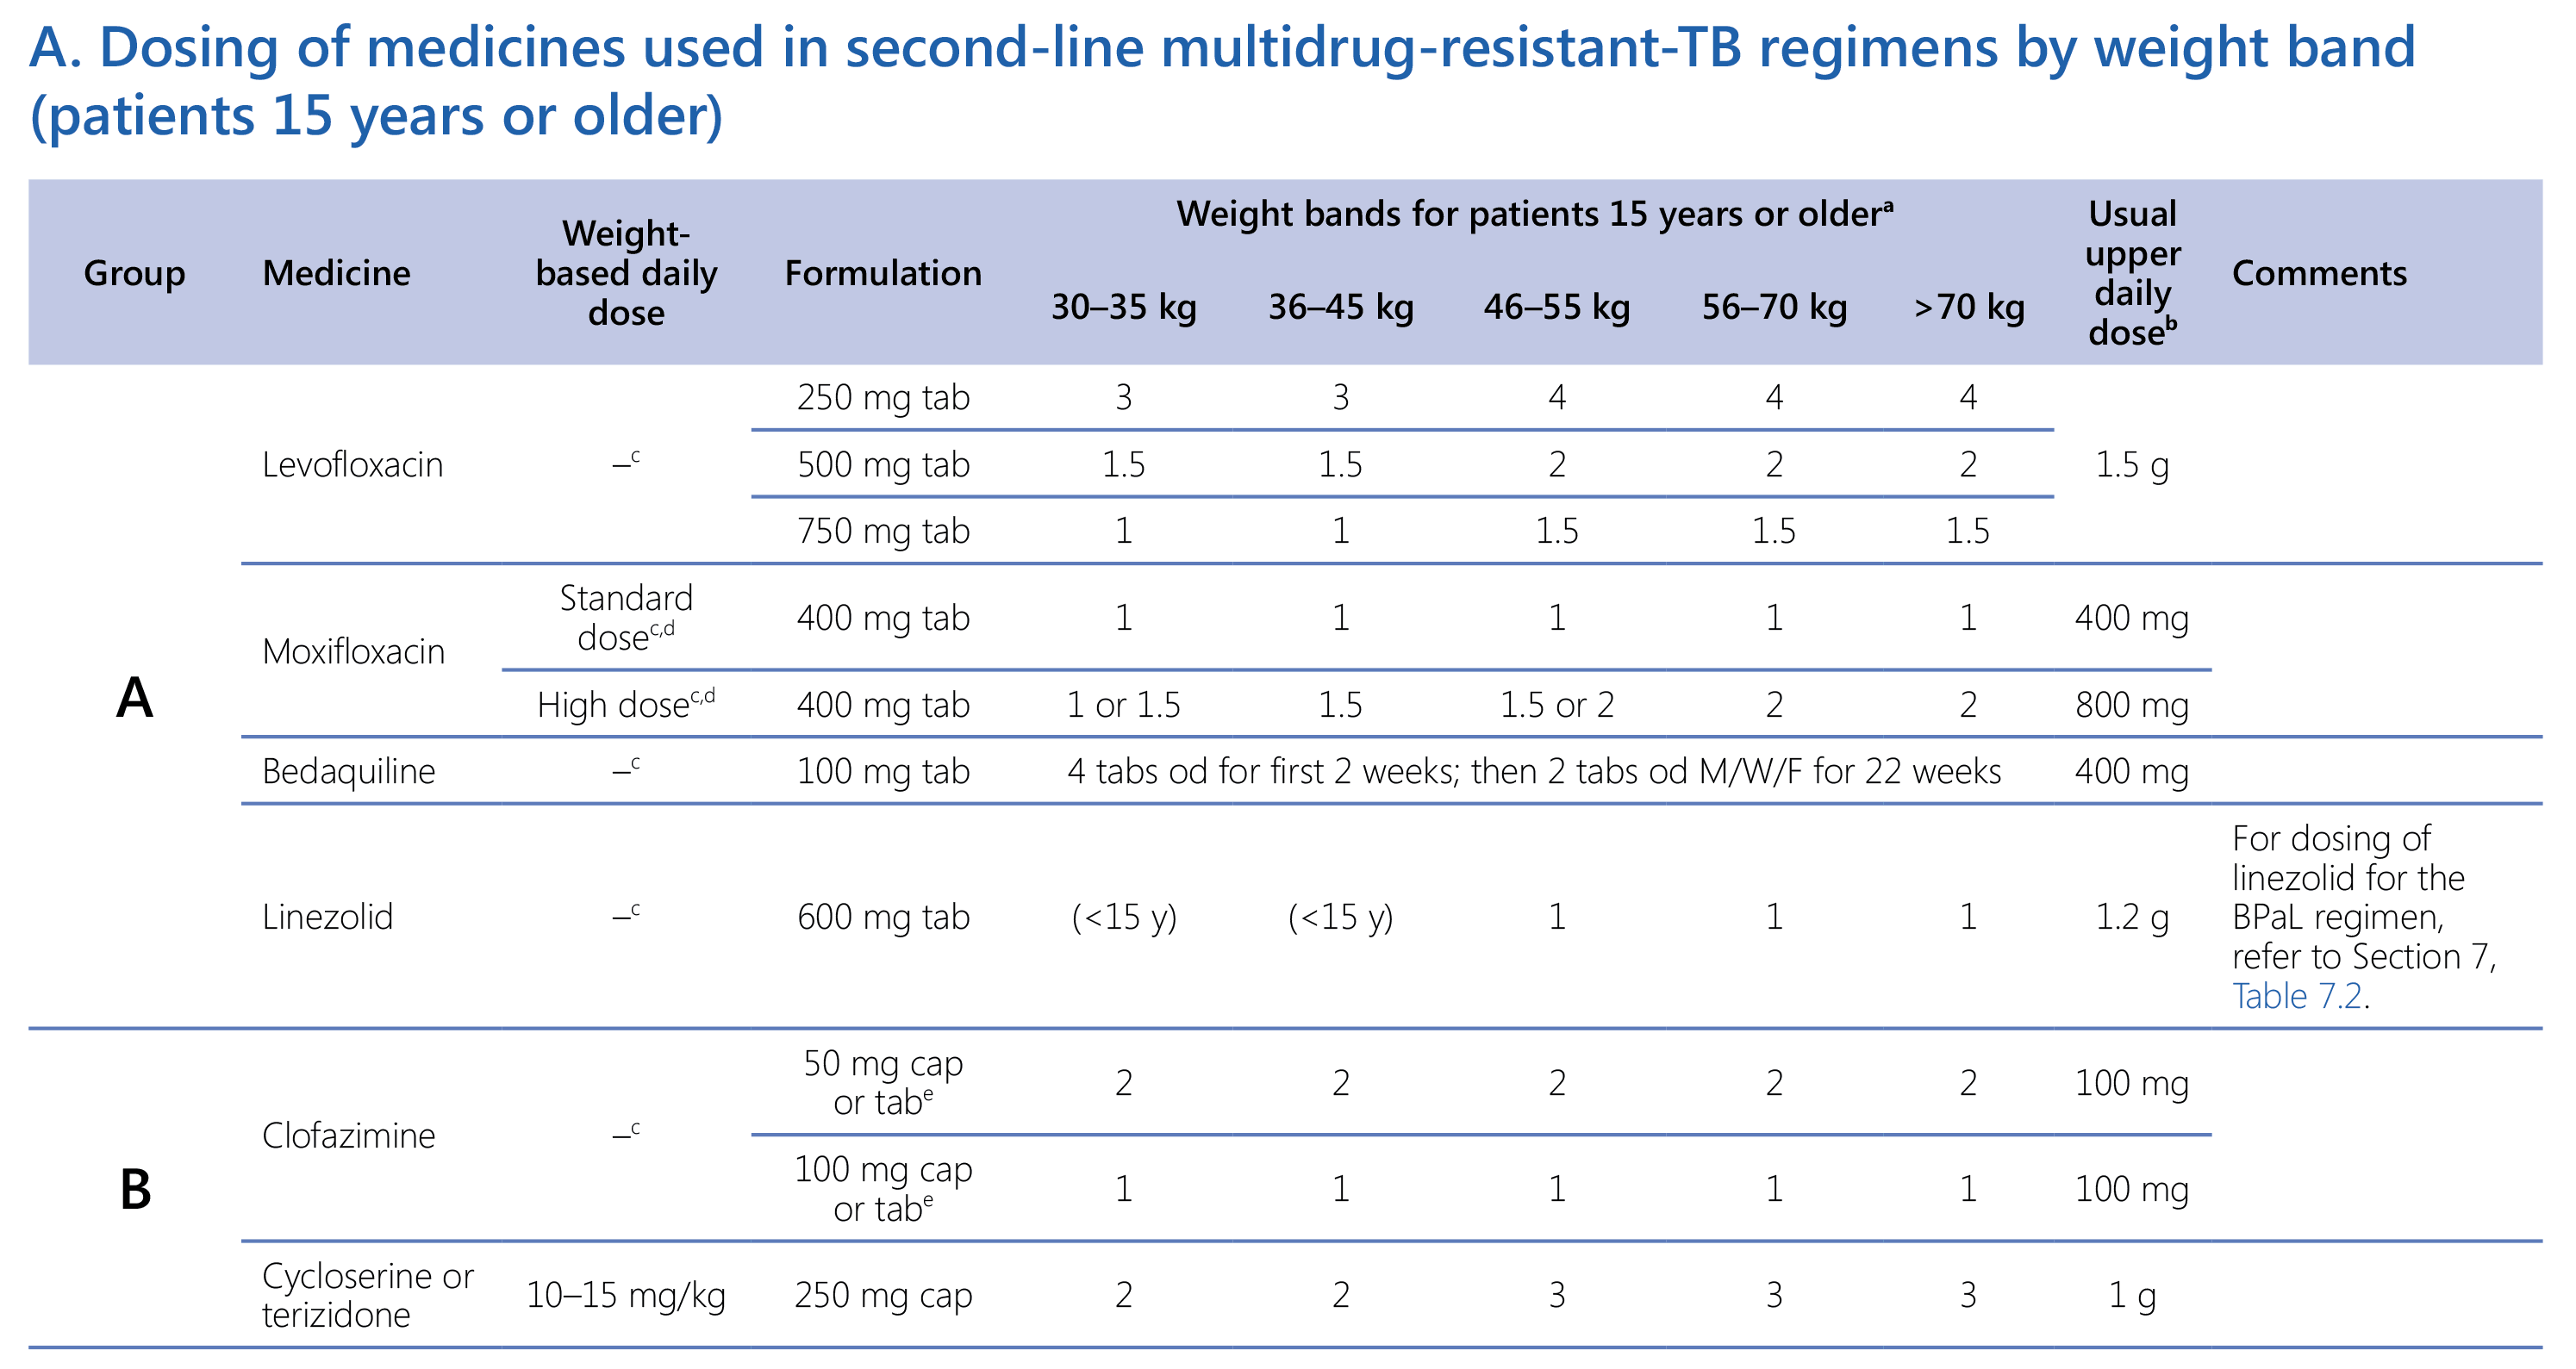  Dosing of medicines used in second-line multidrug-resistant-TB